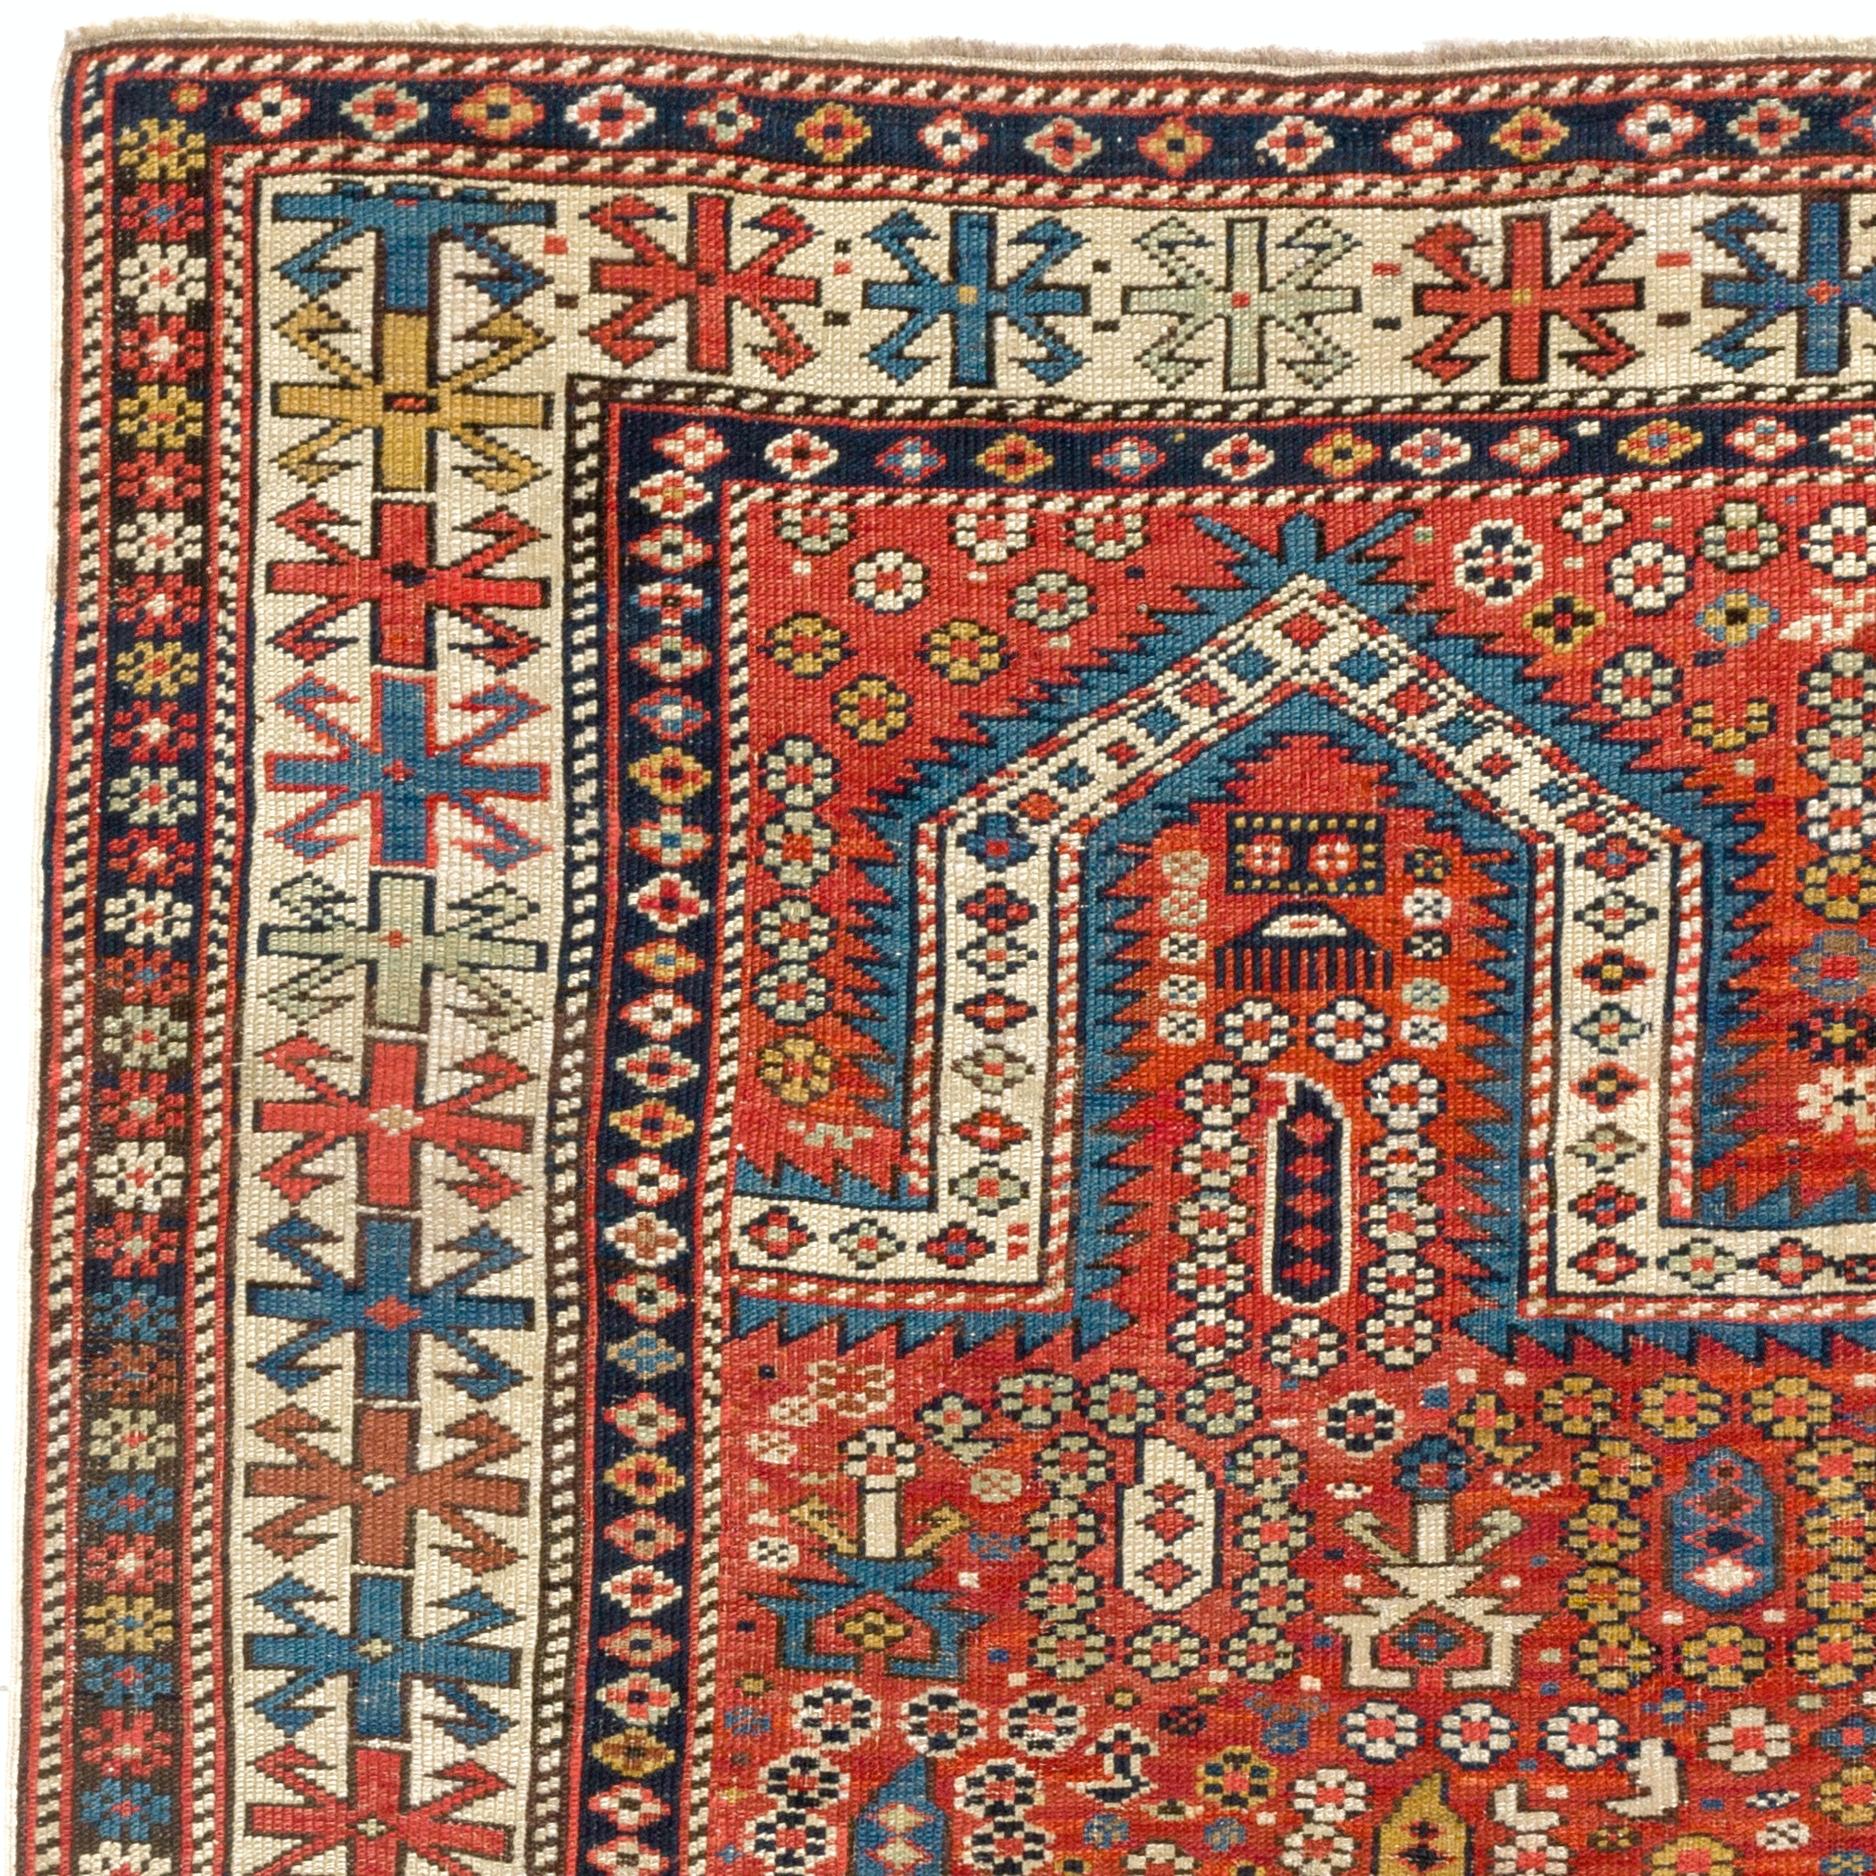 Antique Caucasian Shirvan prayer rug. Finely hand-knotted with even medium wool pile on wool foundation. 
Very good condition. Sturdy and as clean as a brand new rug (deep washed professionally). Measures: 3' x 4'9''.